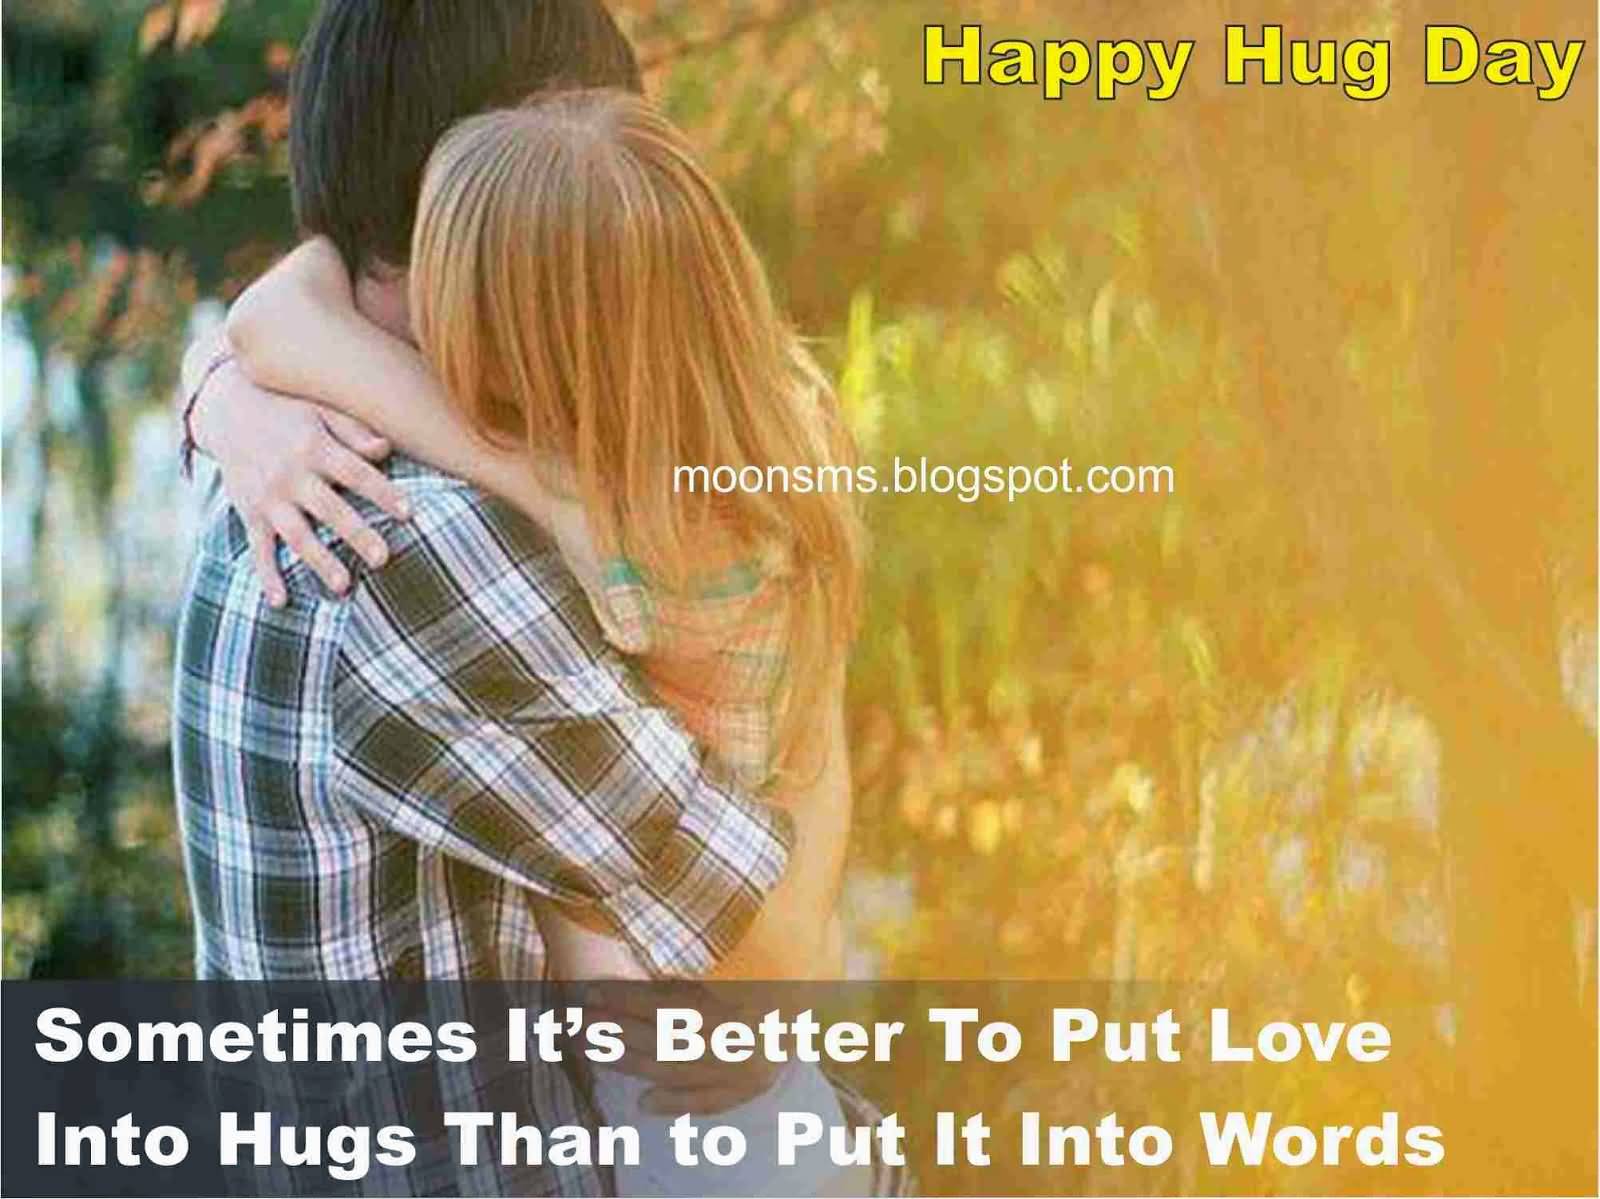 Happy Hug Day Sometimes It s Better To Put Love Into Hugs Than To Put In Into Words